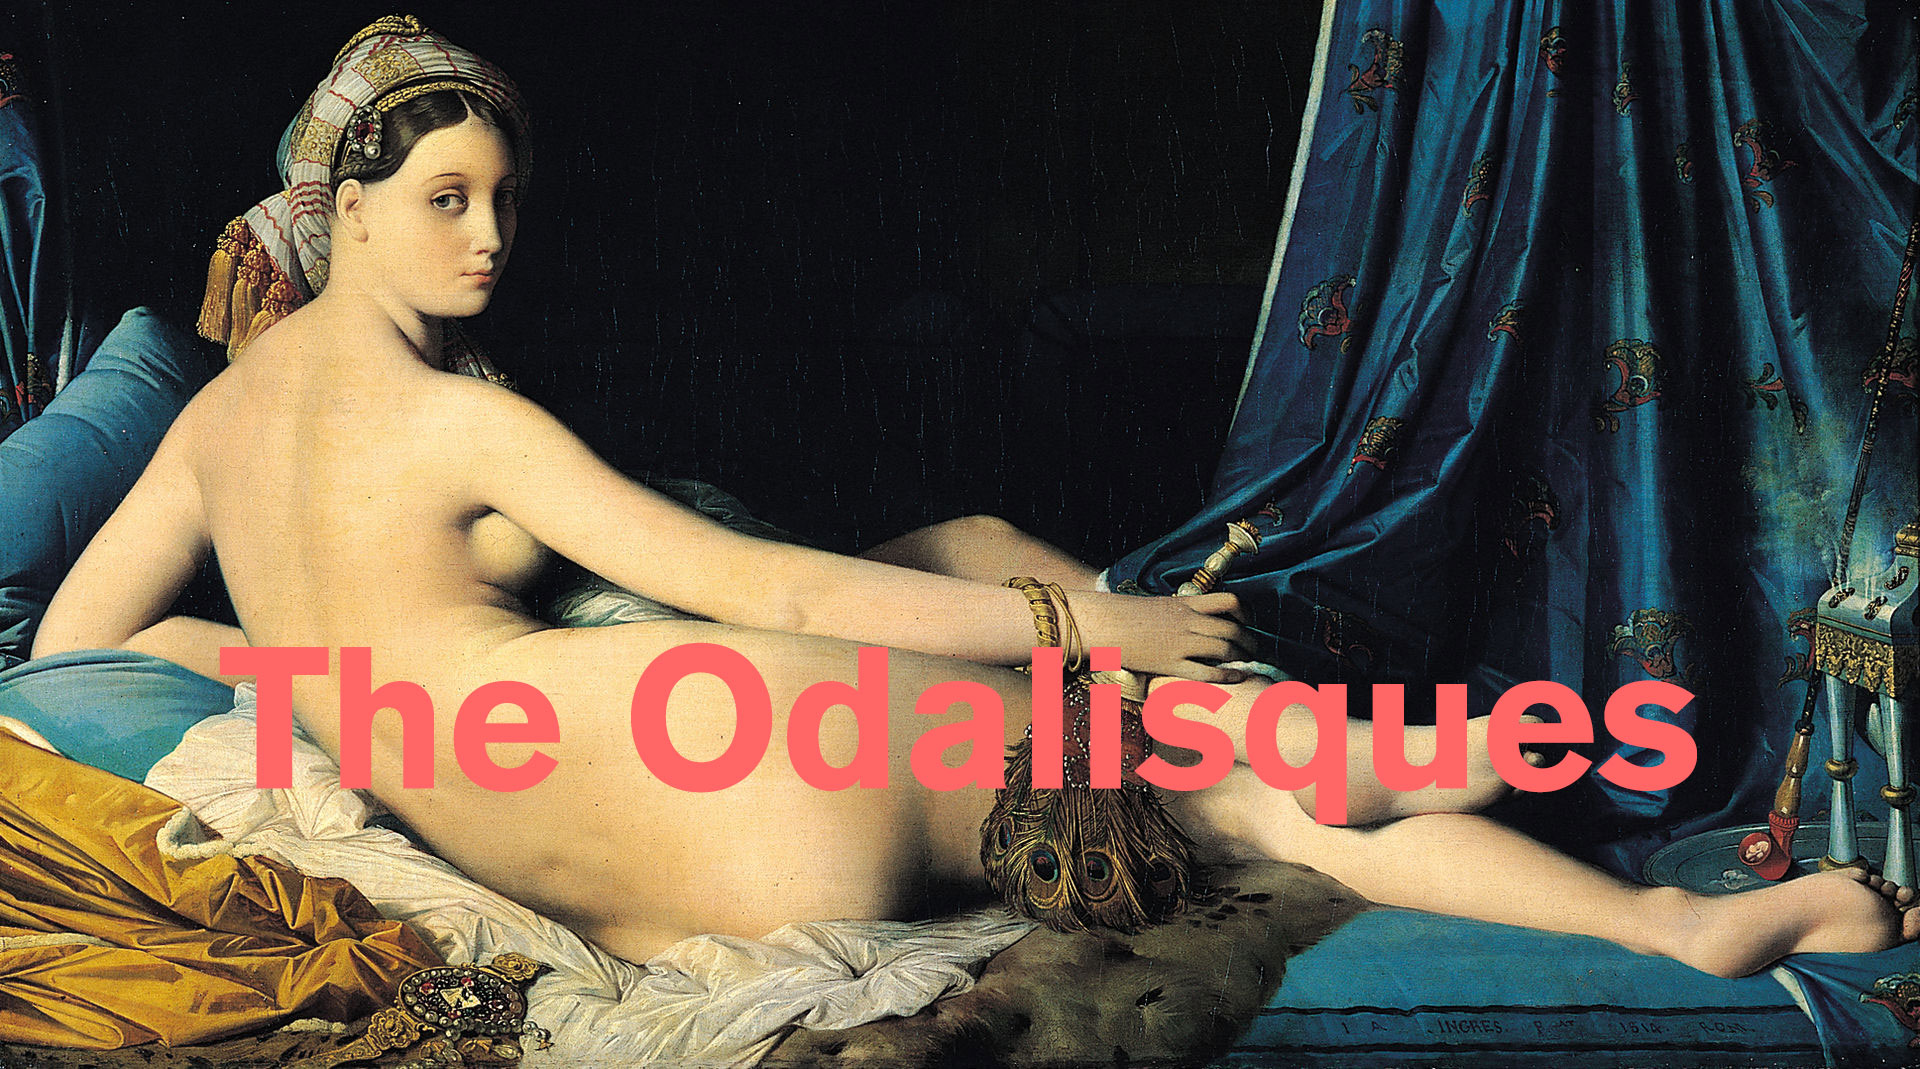 The Odalisques